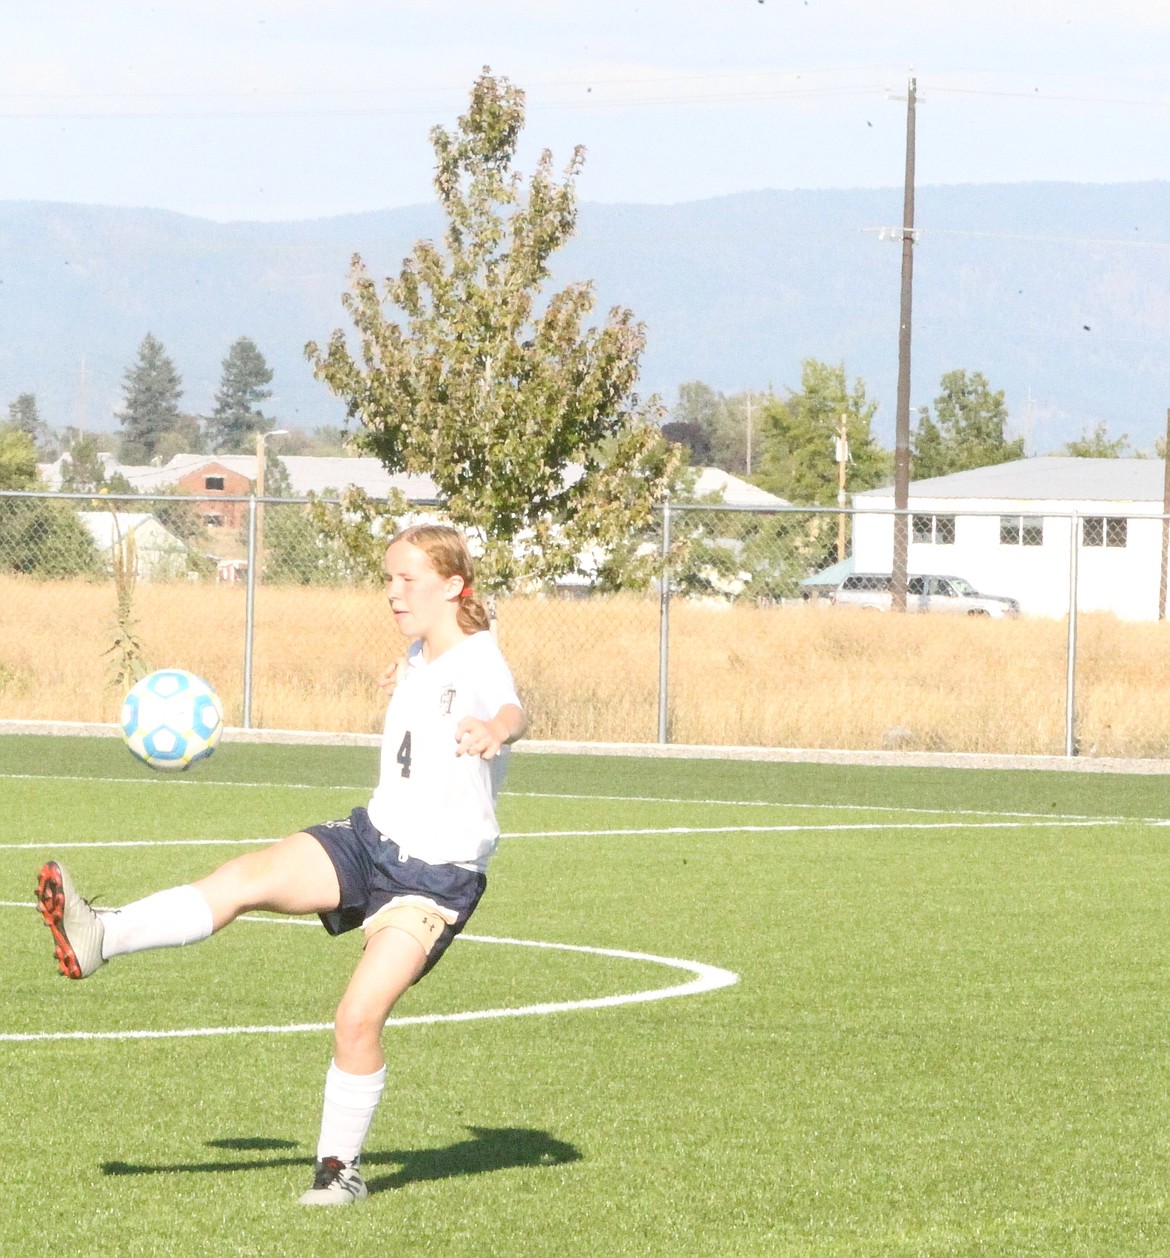 JASON ELLIOTT/Press
Timberlake midfielder Trinity Orrison plays the ball off of her foot during the first half of Wednesday's Intermountain League match at The Fields at Real Life in Post Falls.